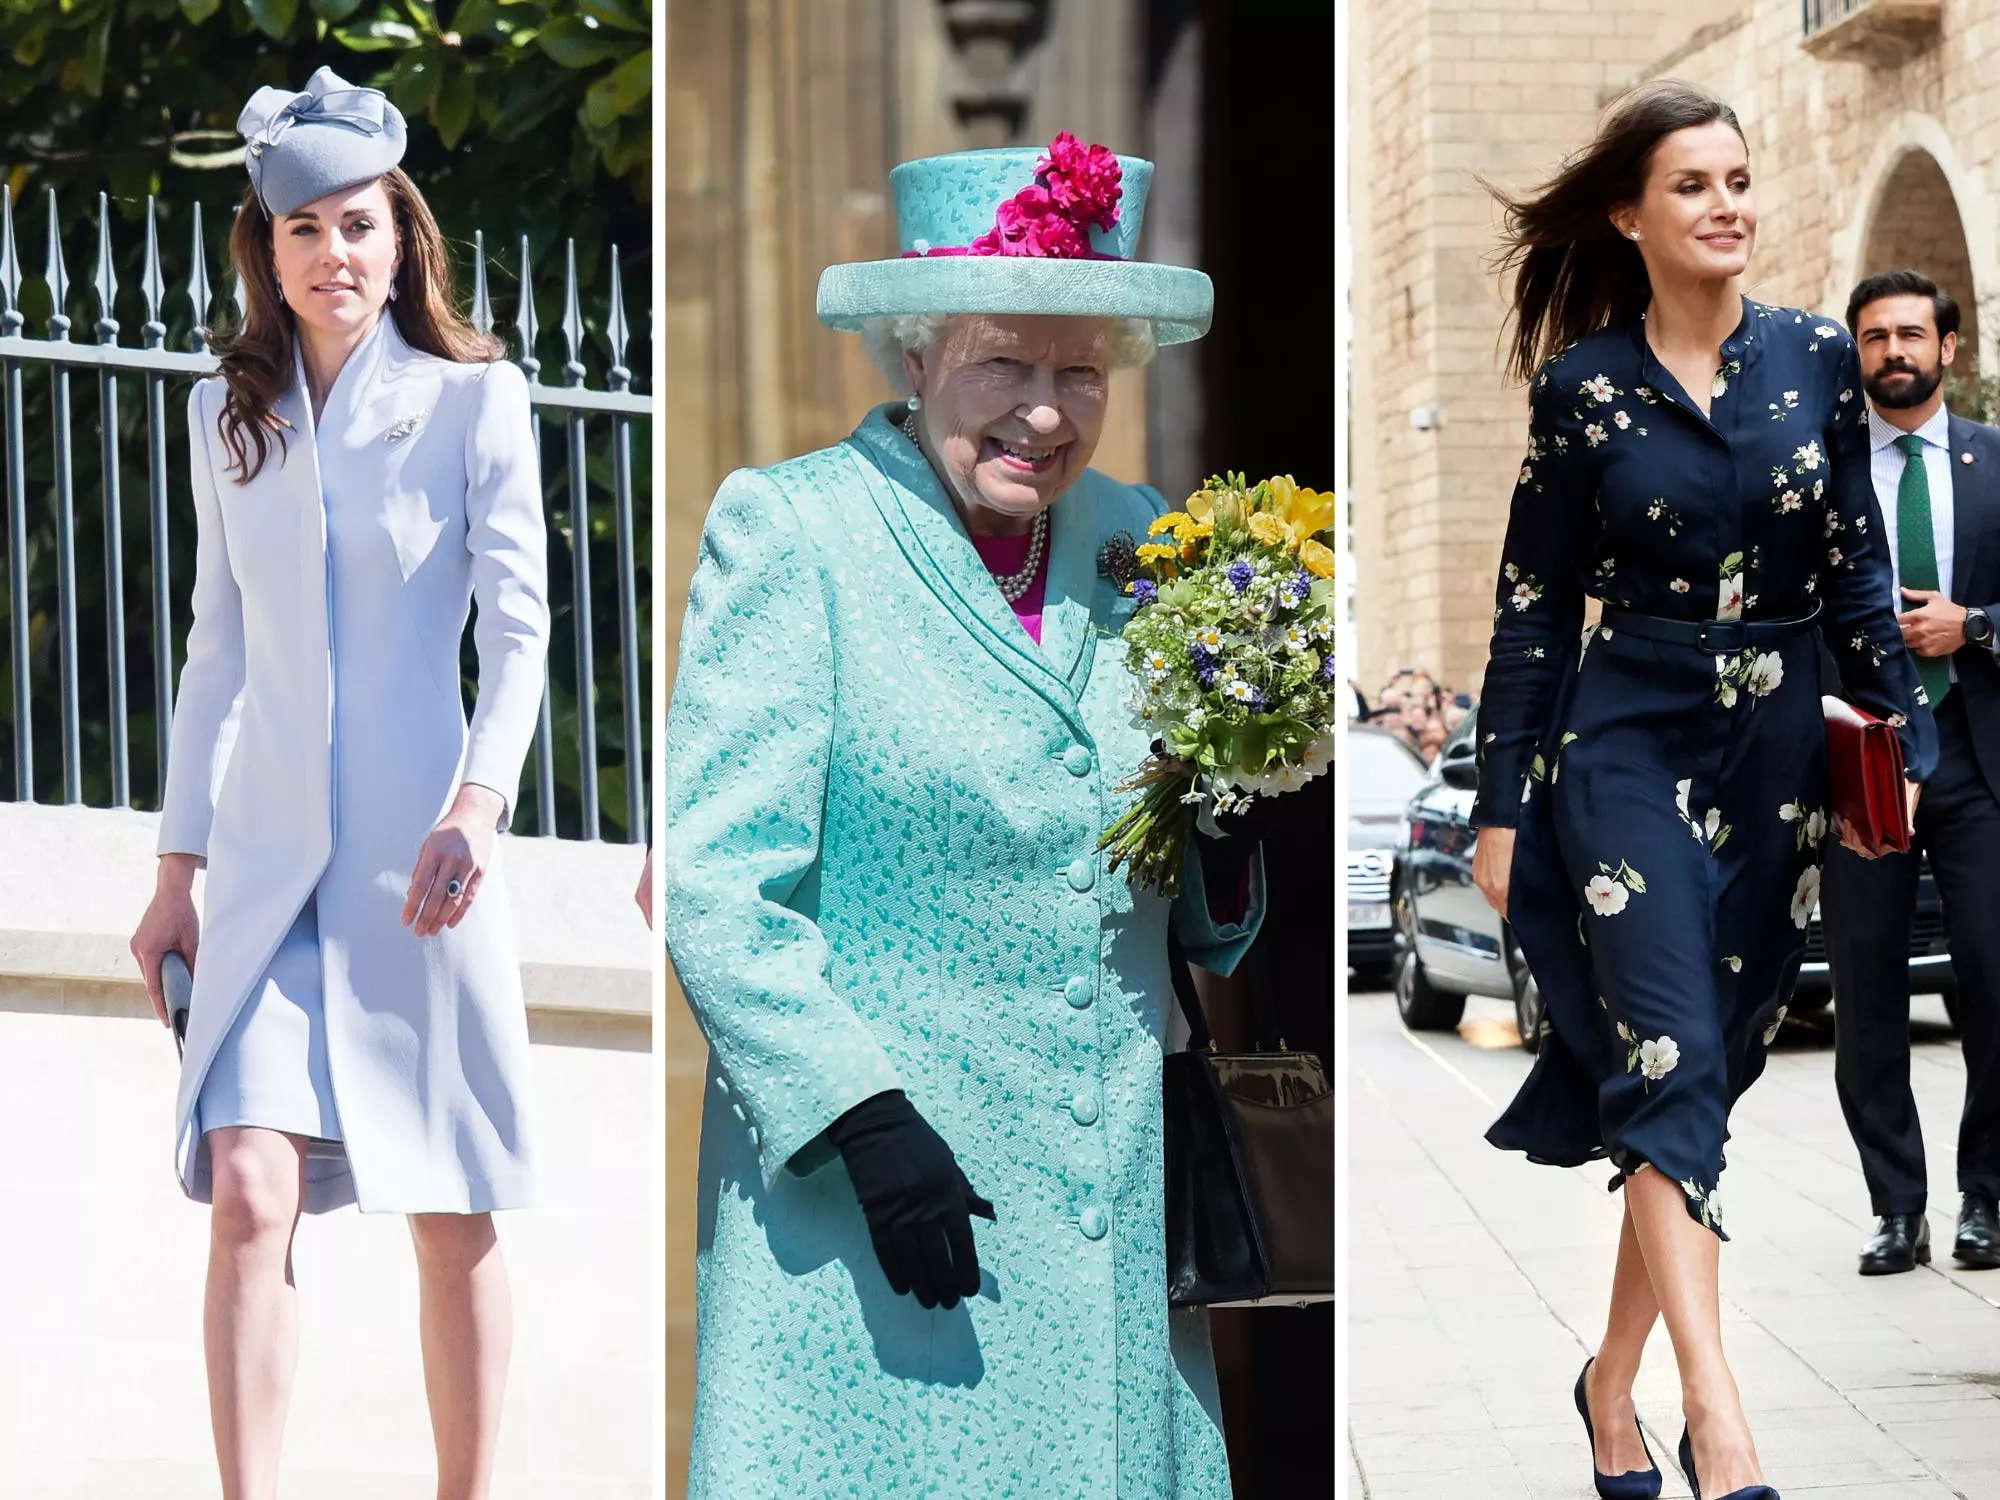 13 of the best outfits royals have worn for Easter services ...